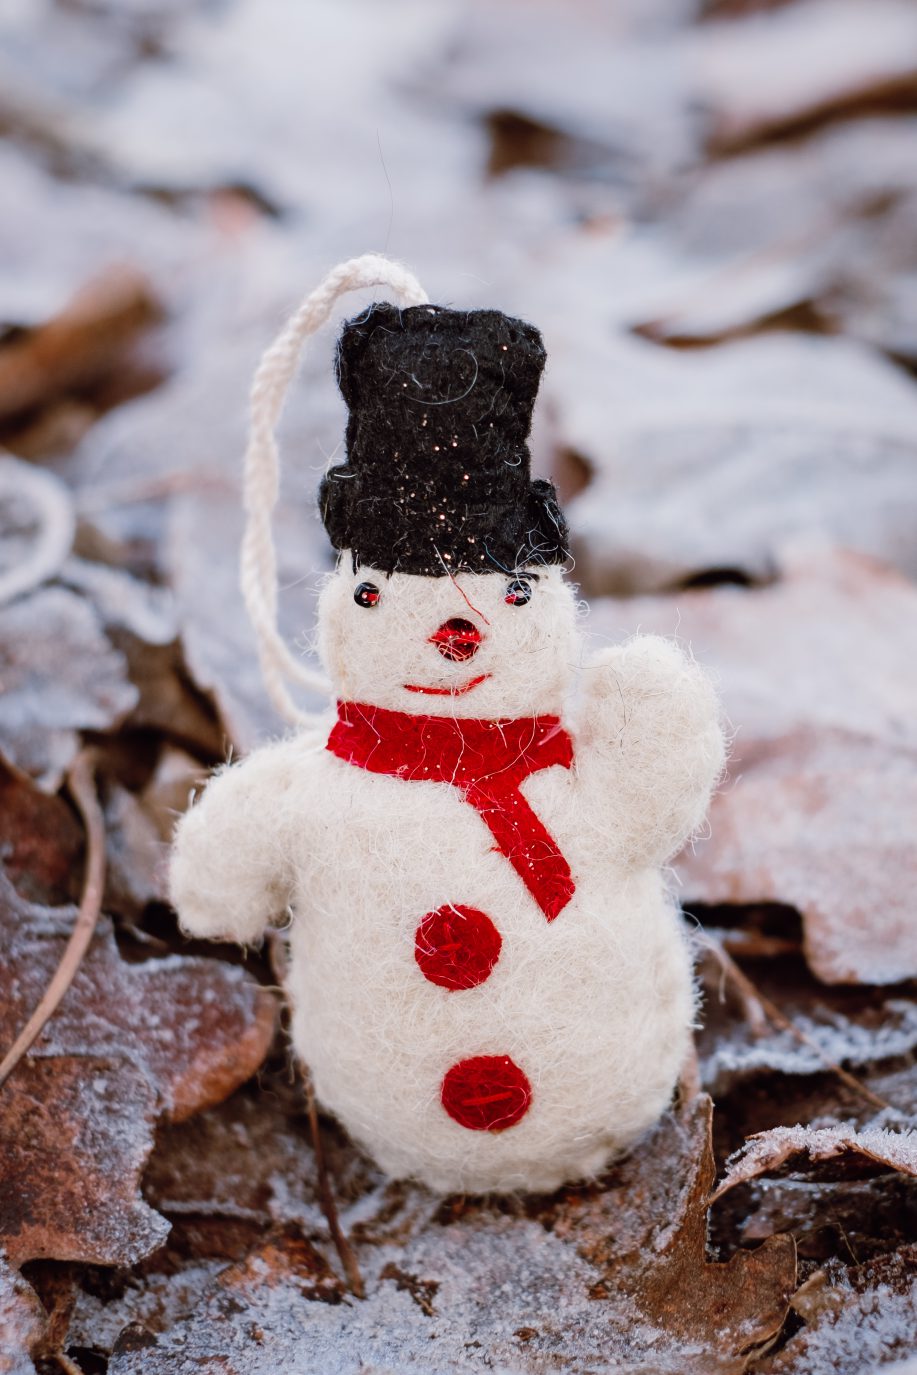 Felted snowman on frosted leaves 5 - free stock photo